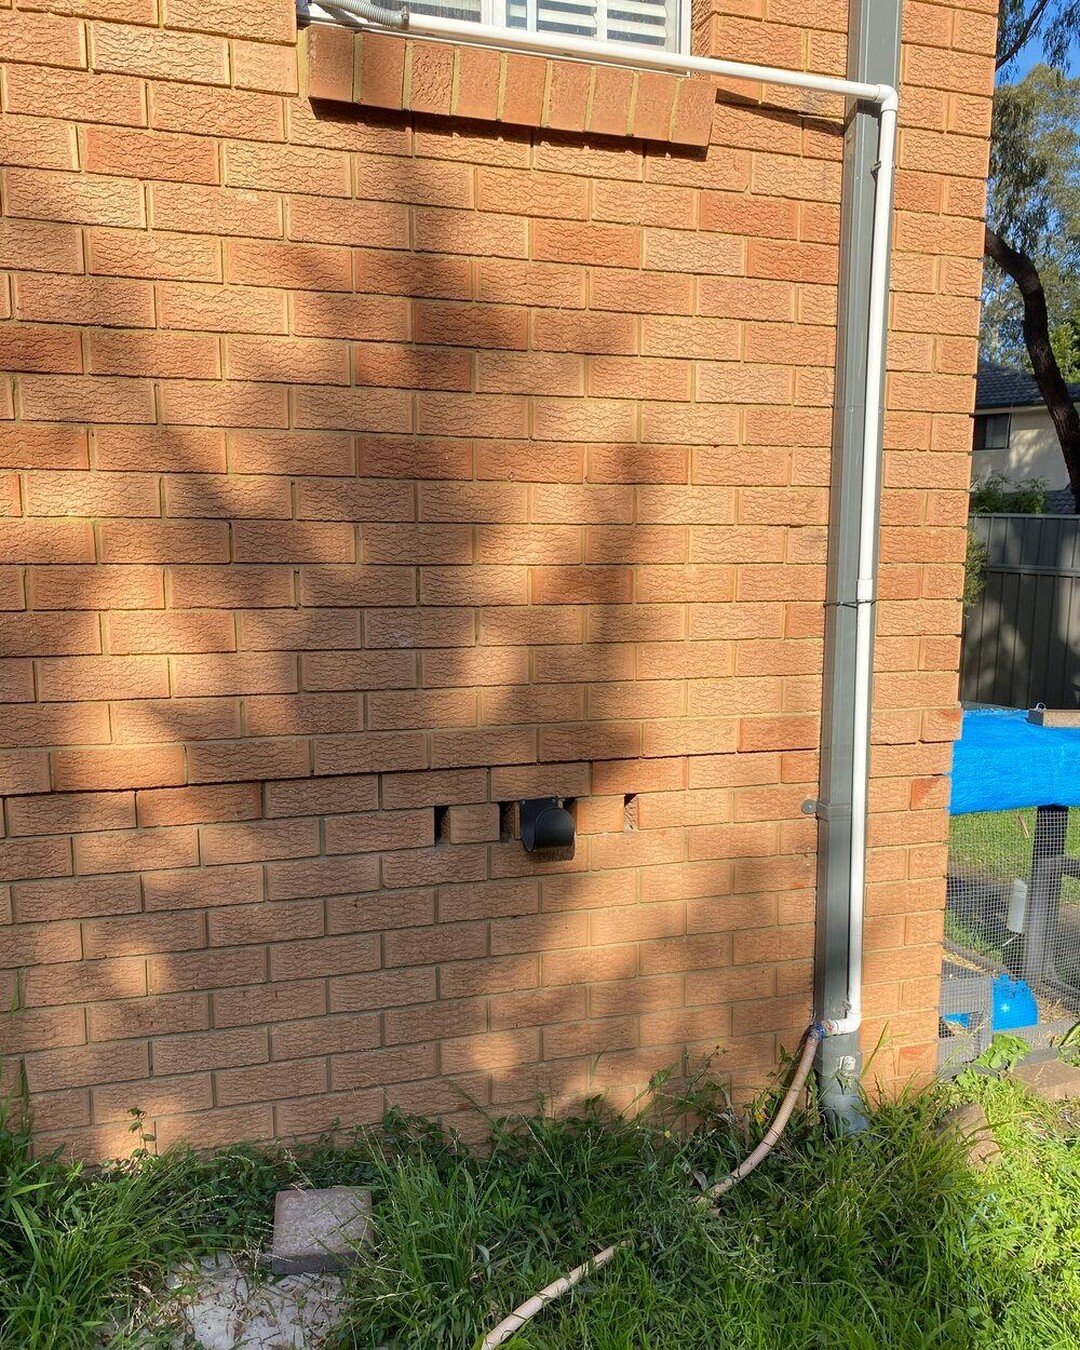 Hose Tap Relocation, Greystanes, NSW

This customer requested their hose tap to be relocated to the side of their house, which was initially positioned at the rear of their house. We cut the existing hose tap piping and removed the T section, welded 